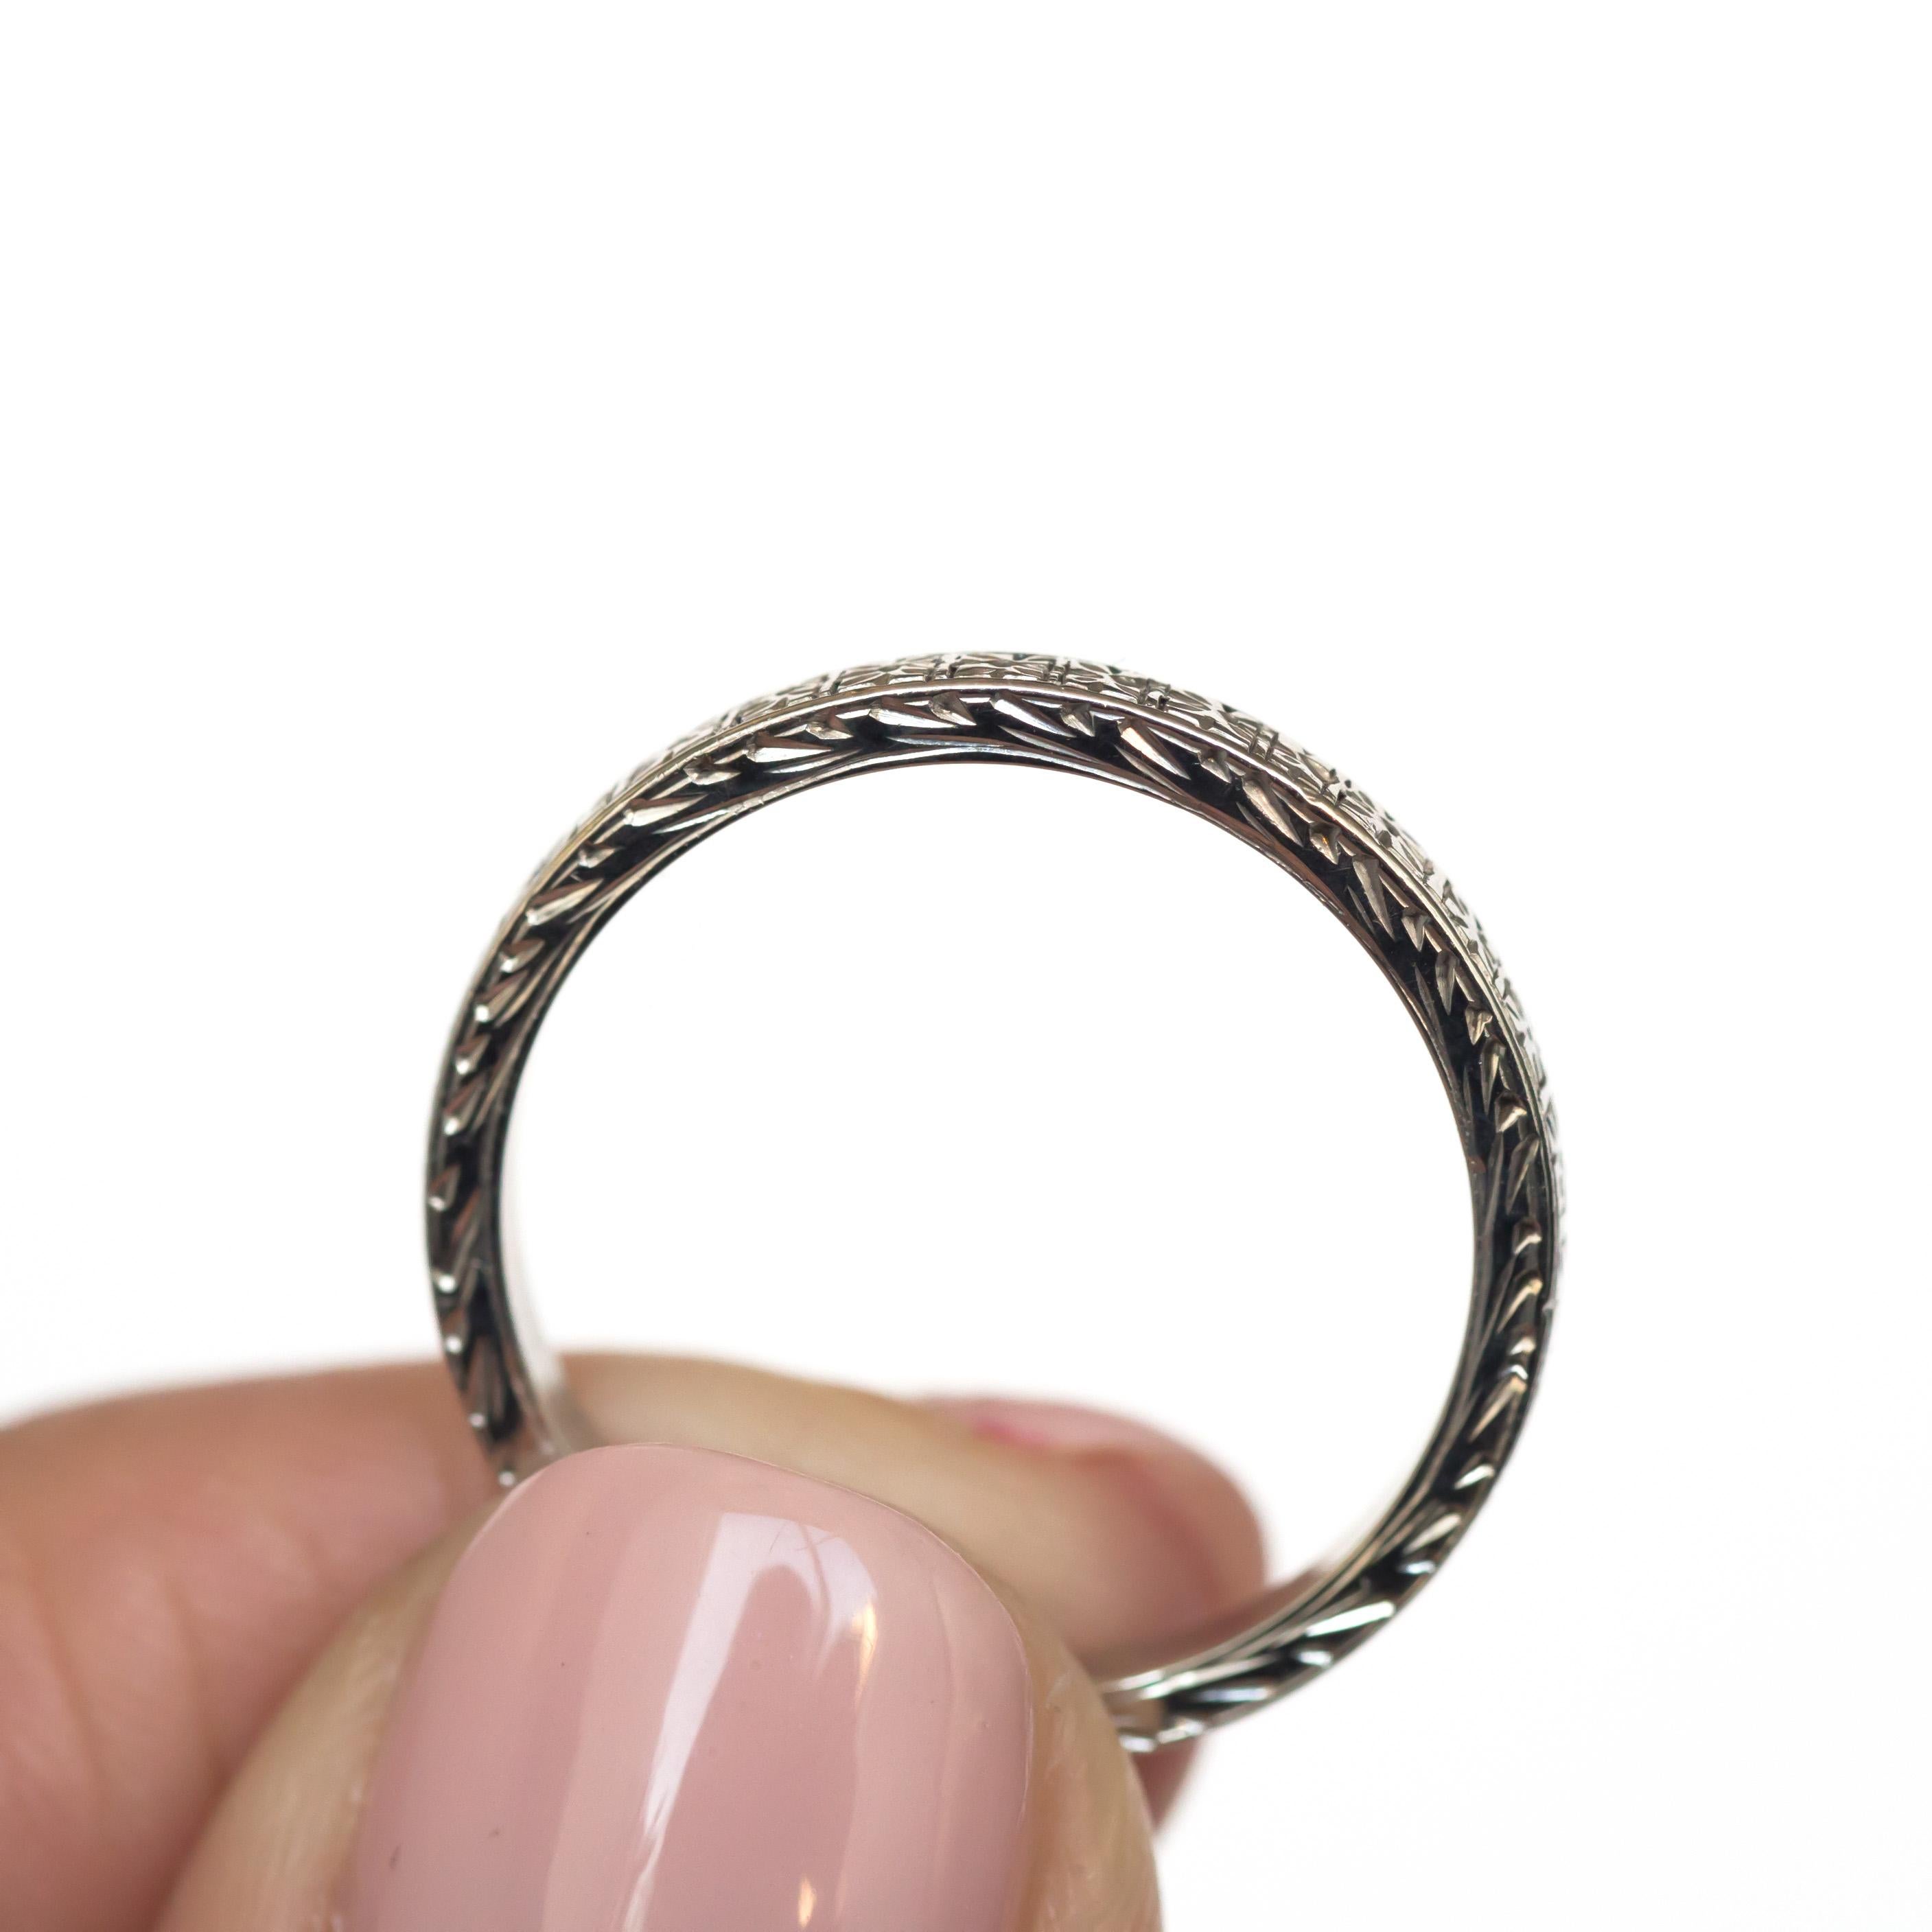 Ring Size: 5.50
Metal Type: 18 karat White Gold 
Weight: 2.6 grams


Finger to Top of Stone Measurement: 1.55mm
Width: 2.25mm
